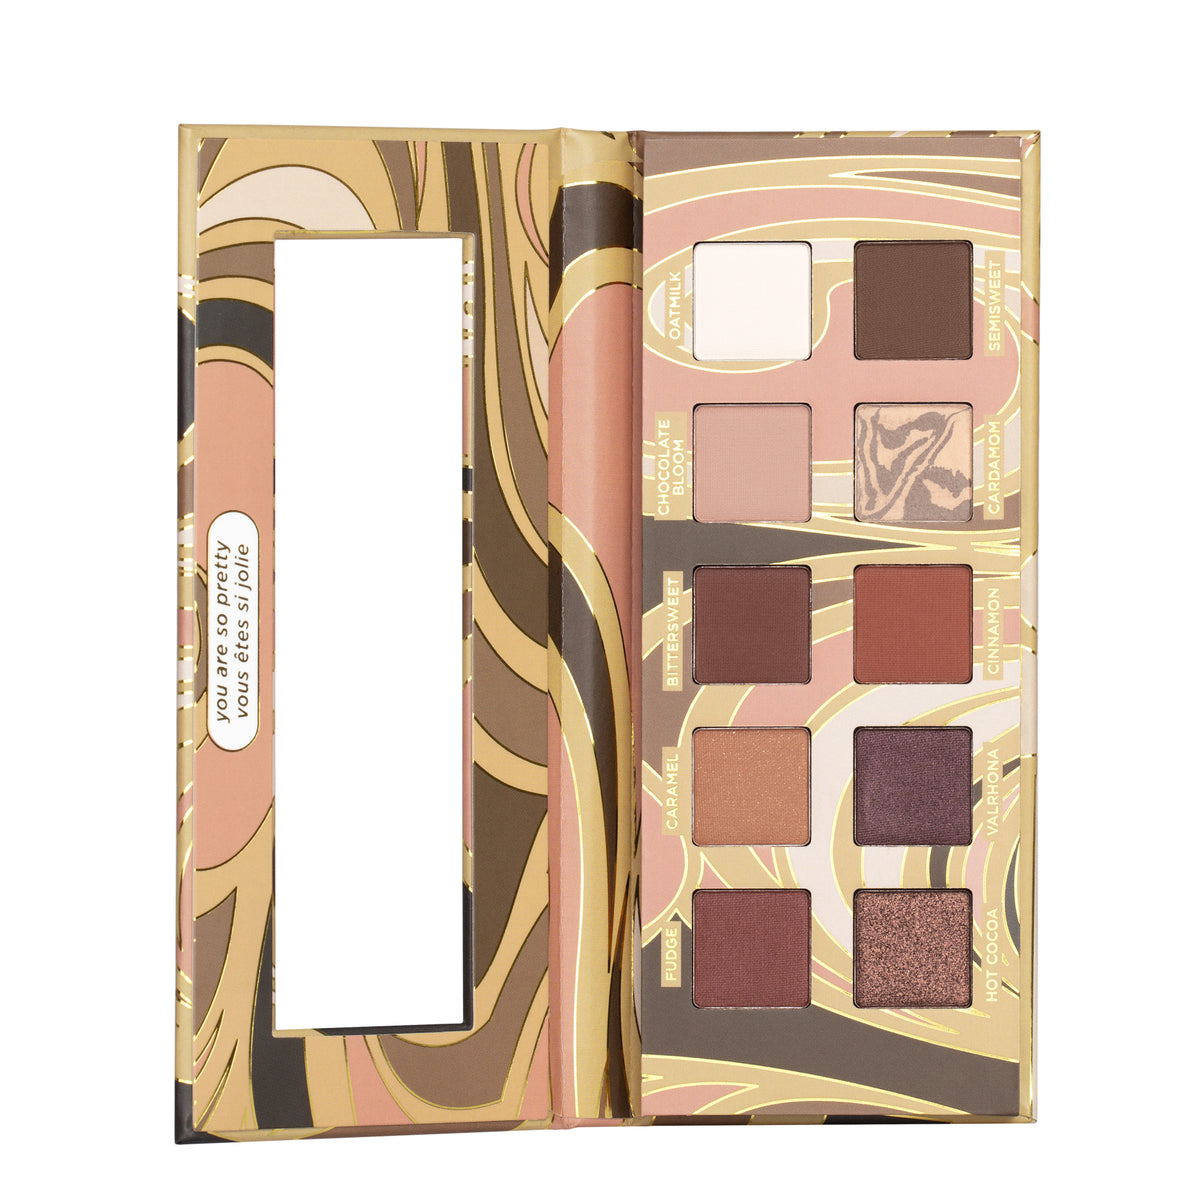 Cocoa Nudes Eyeshadow Palette - Makeup - Pacifica Beauty